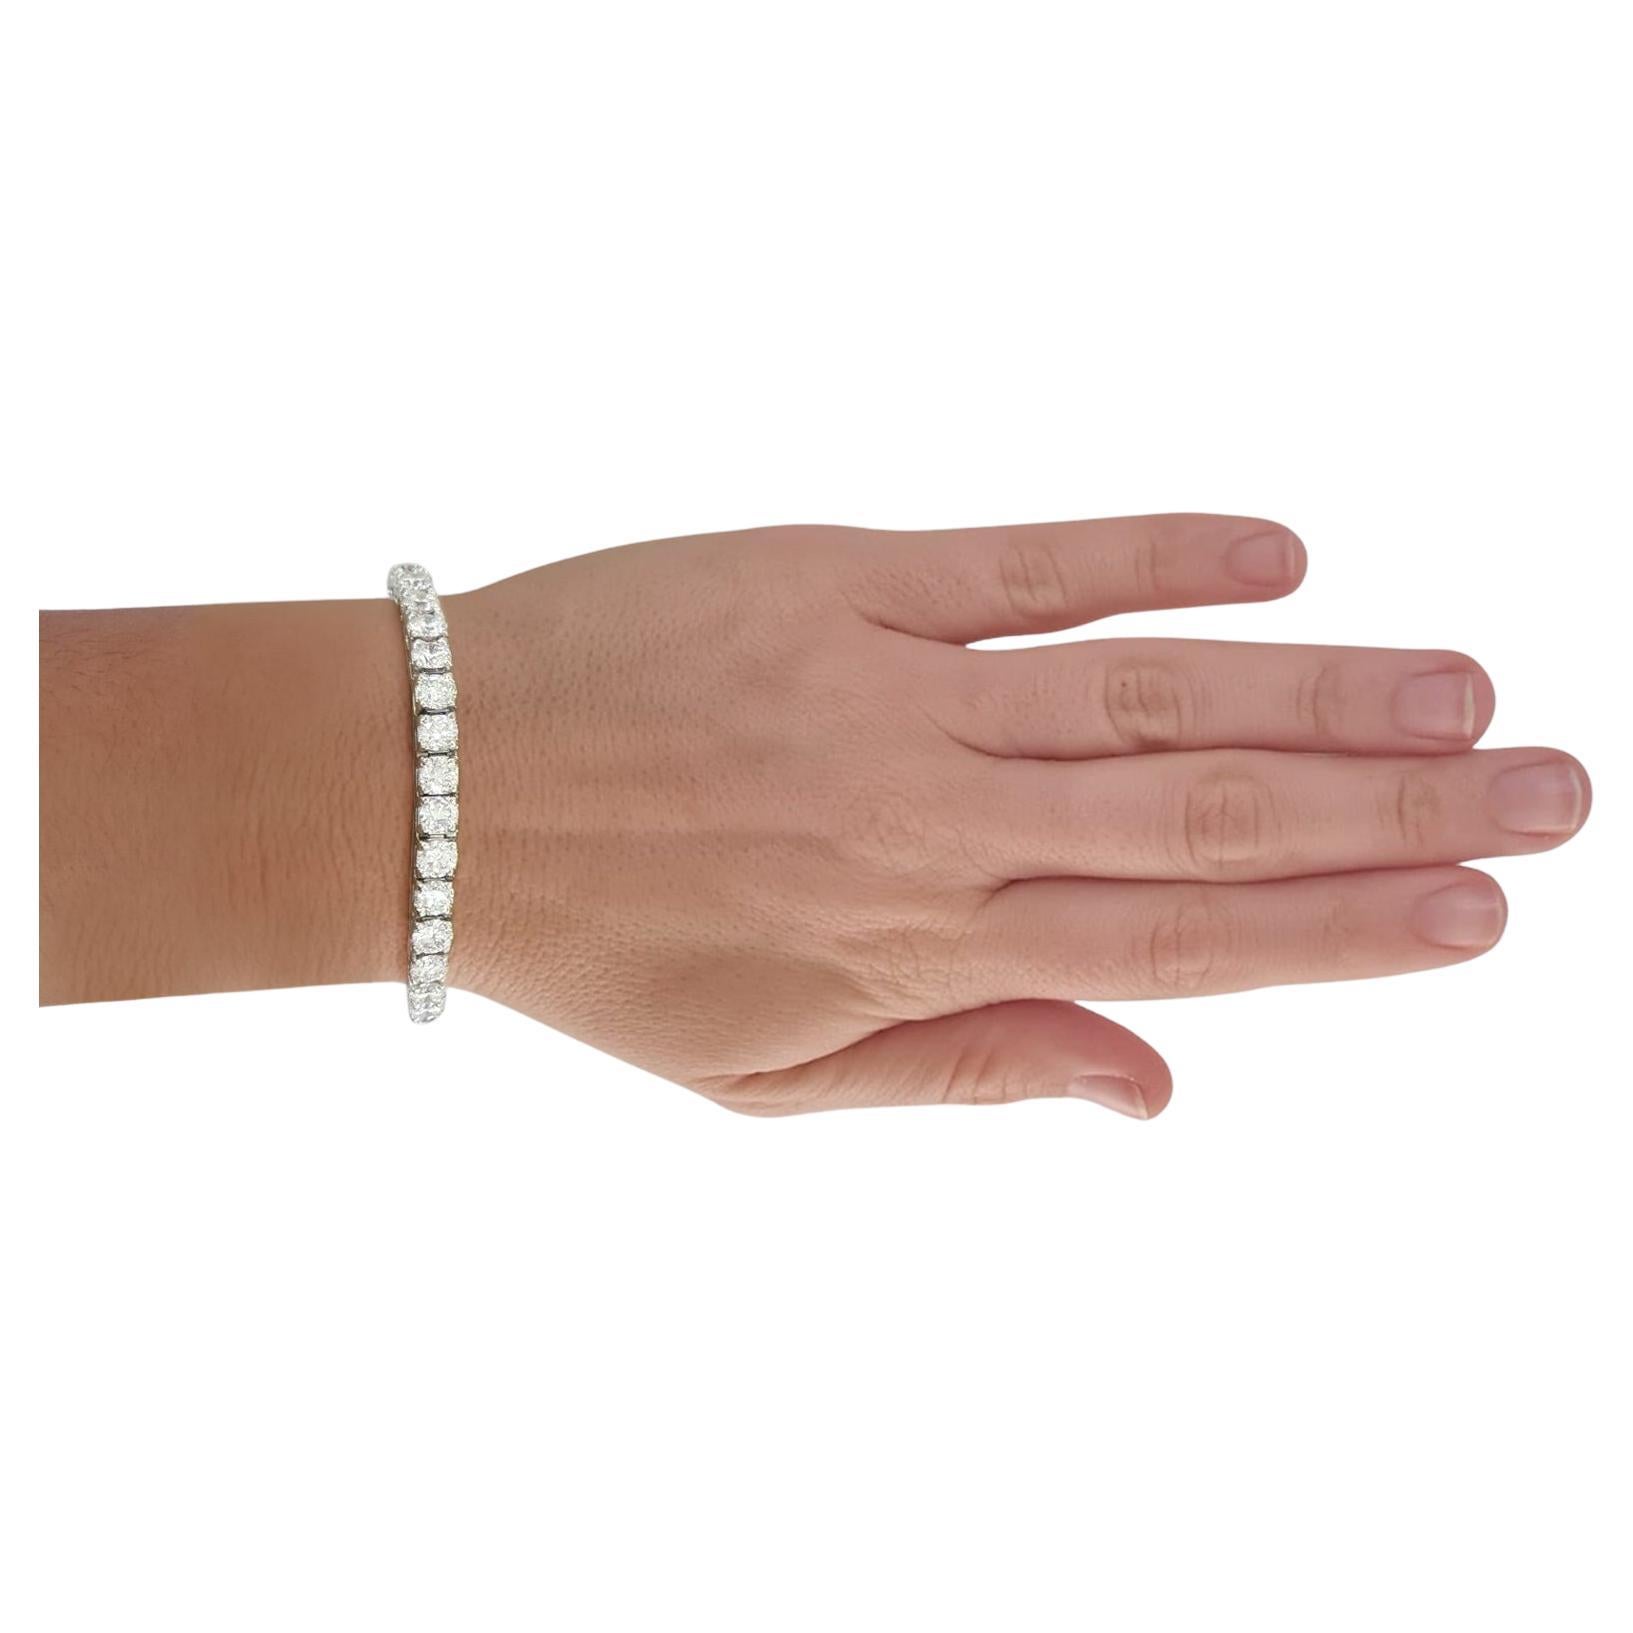 Tennis Bracelet with 12.66 carat ROUND cut diamonds in Platinum (0.30ct each)
Diamond Signature Wrap BRACELET with VVS round stones & pave on side 42 stones 0.30ct each stone TCW: 12,66ct TCW small Pave: 0.72ct 7 inches long